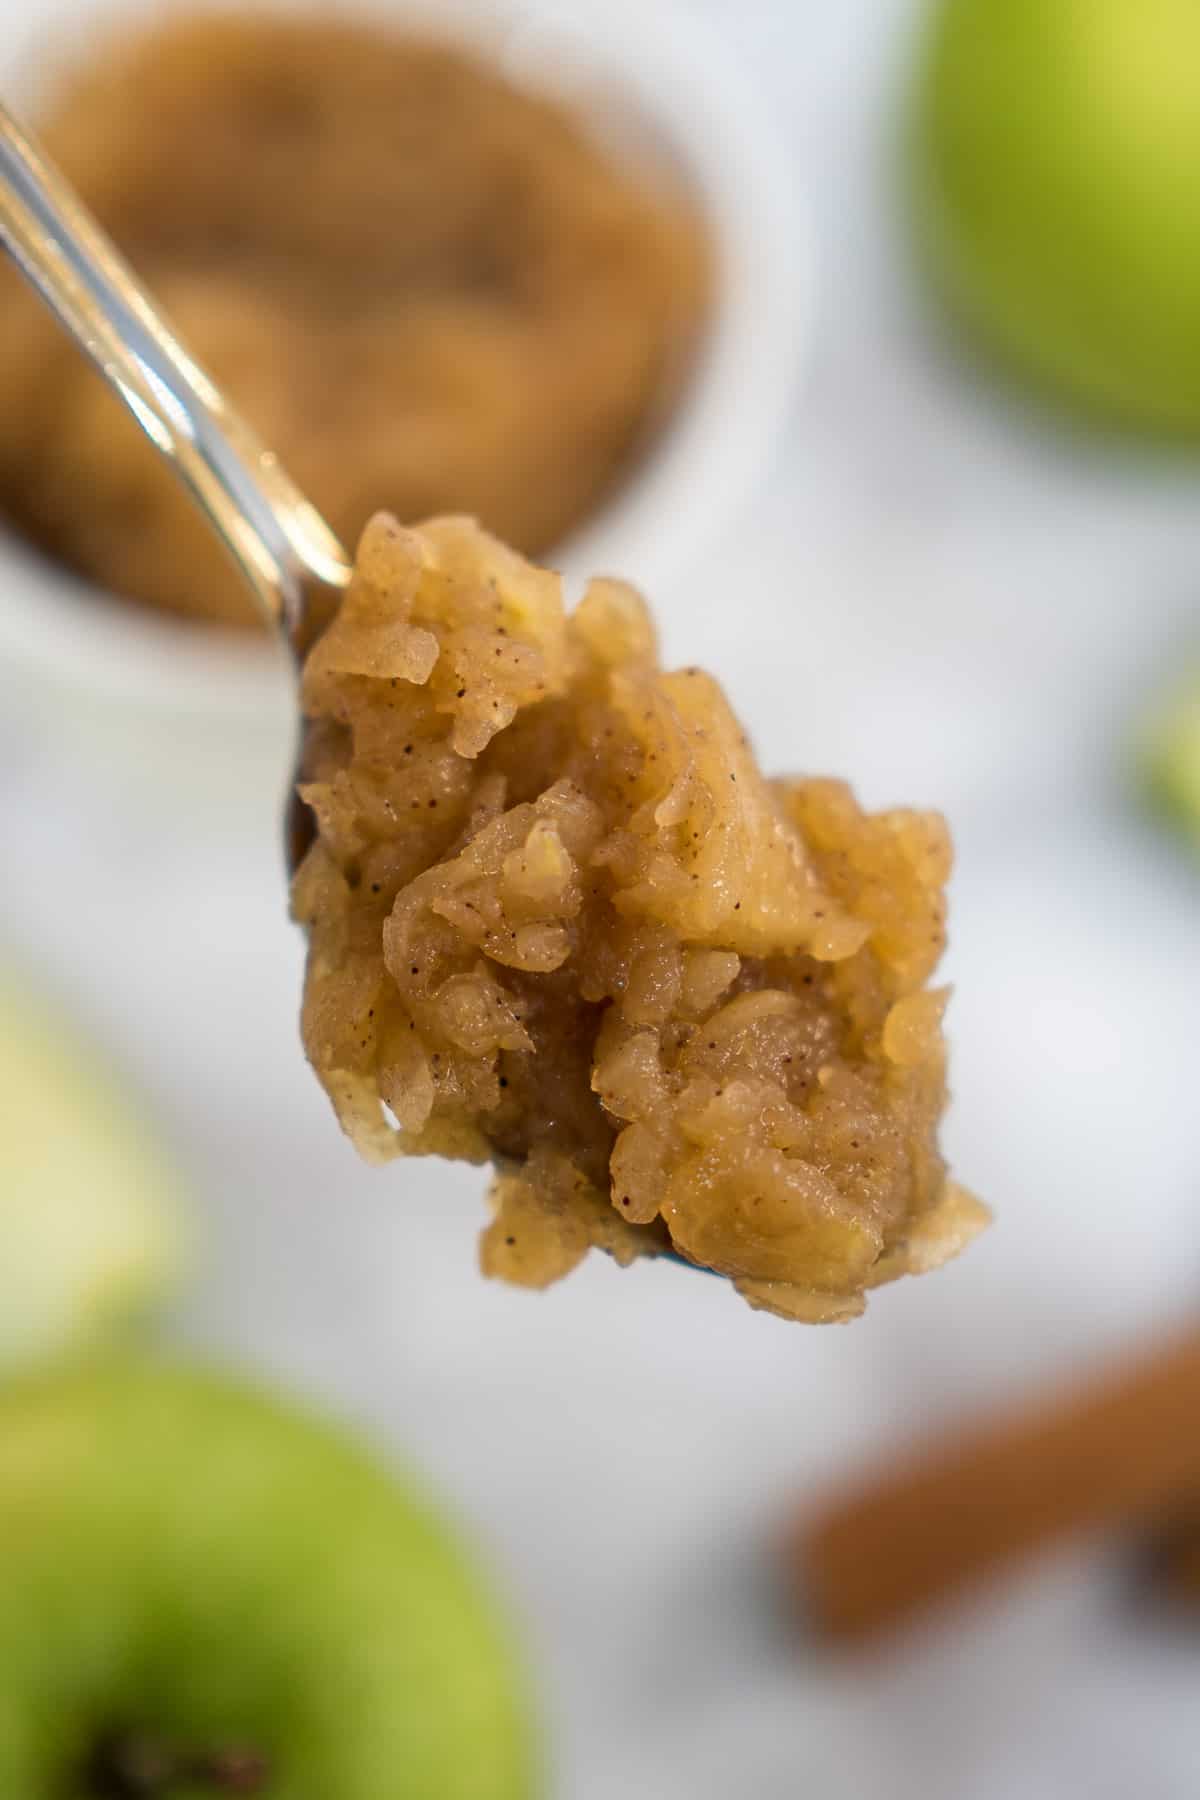 A spoon of apple compote.